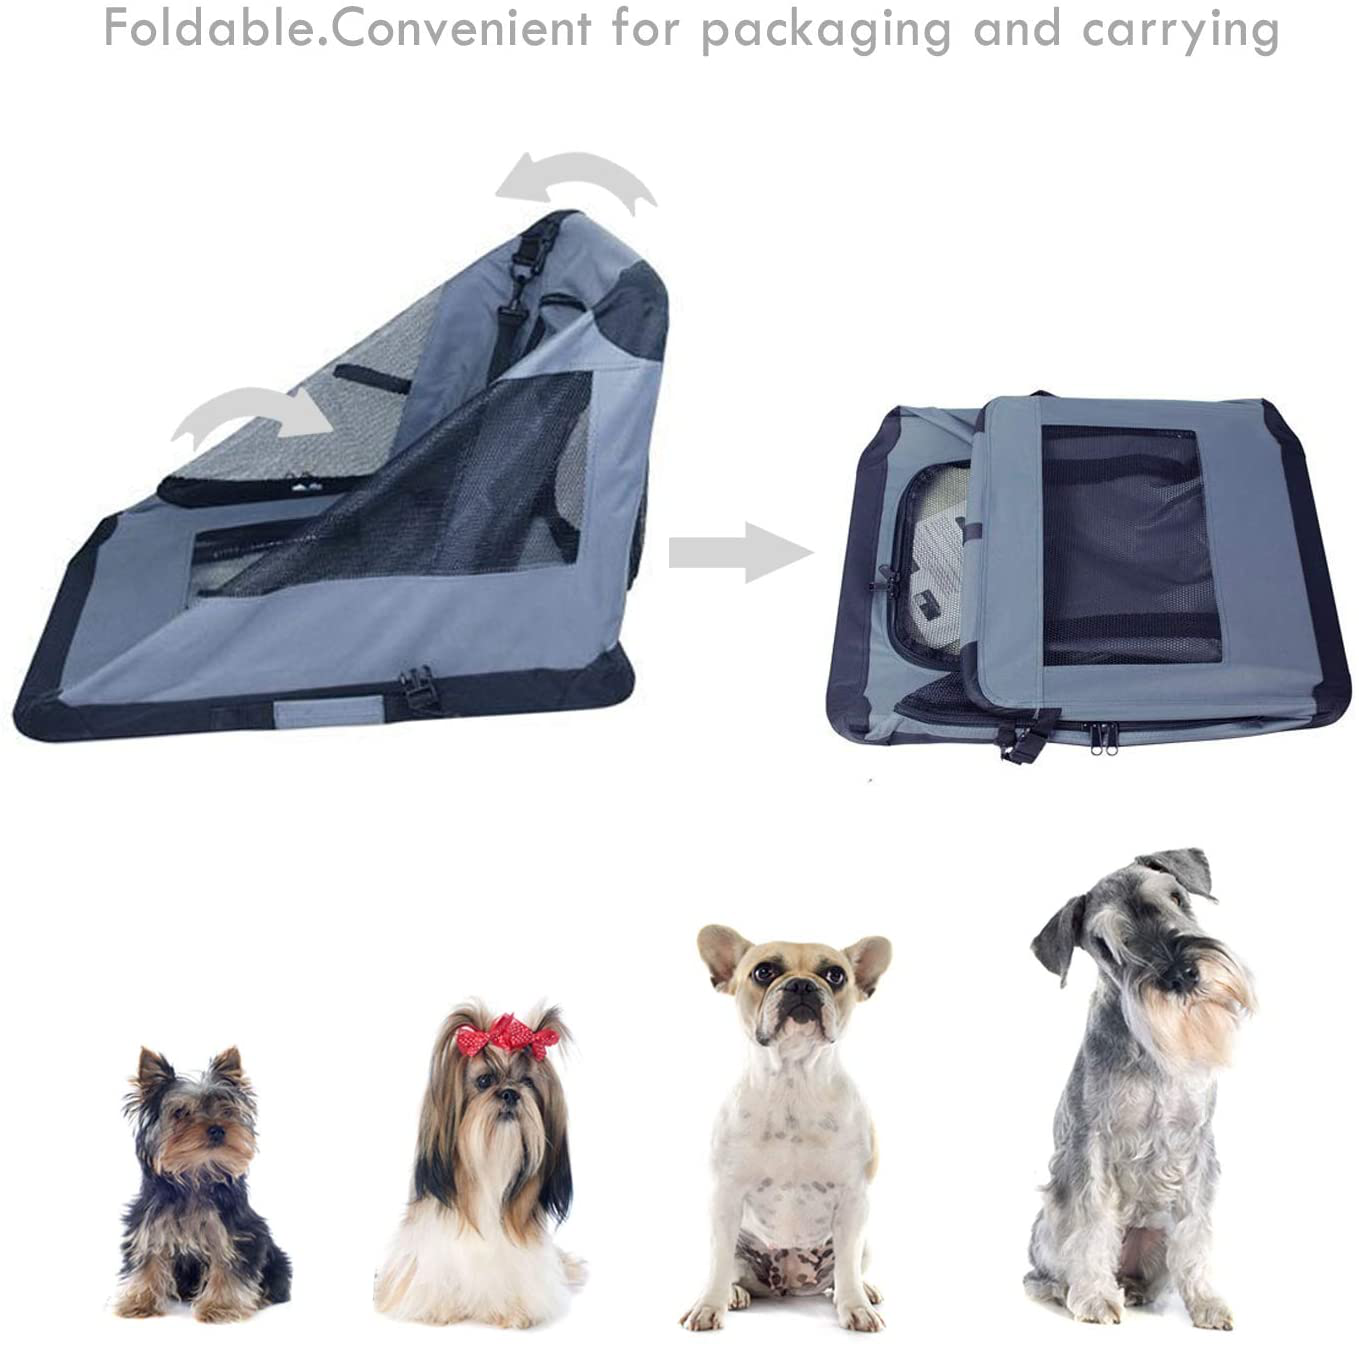 JESPET Soft Pet Crates Kennel 26", 30" & 36", 3 Door Soft Sided Folding Travel Pet Carrier with Straps and Fleece Mat for Dogs, Cats, Rabbits, Indoor/Outdoor Use with Grey, Blue & Beige, Black Animals & Pet Supplies > Pet Supplies > Dog Supplies > Dog Kennels & Runs JESPET   